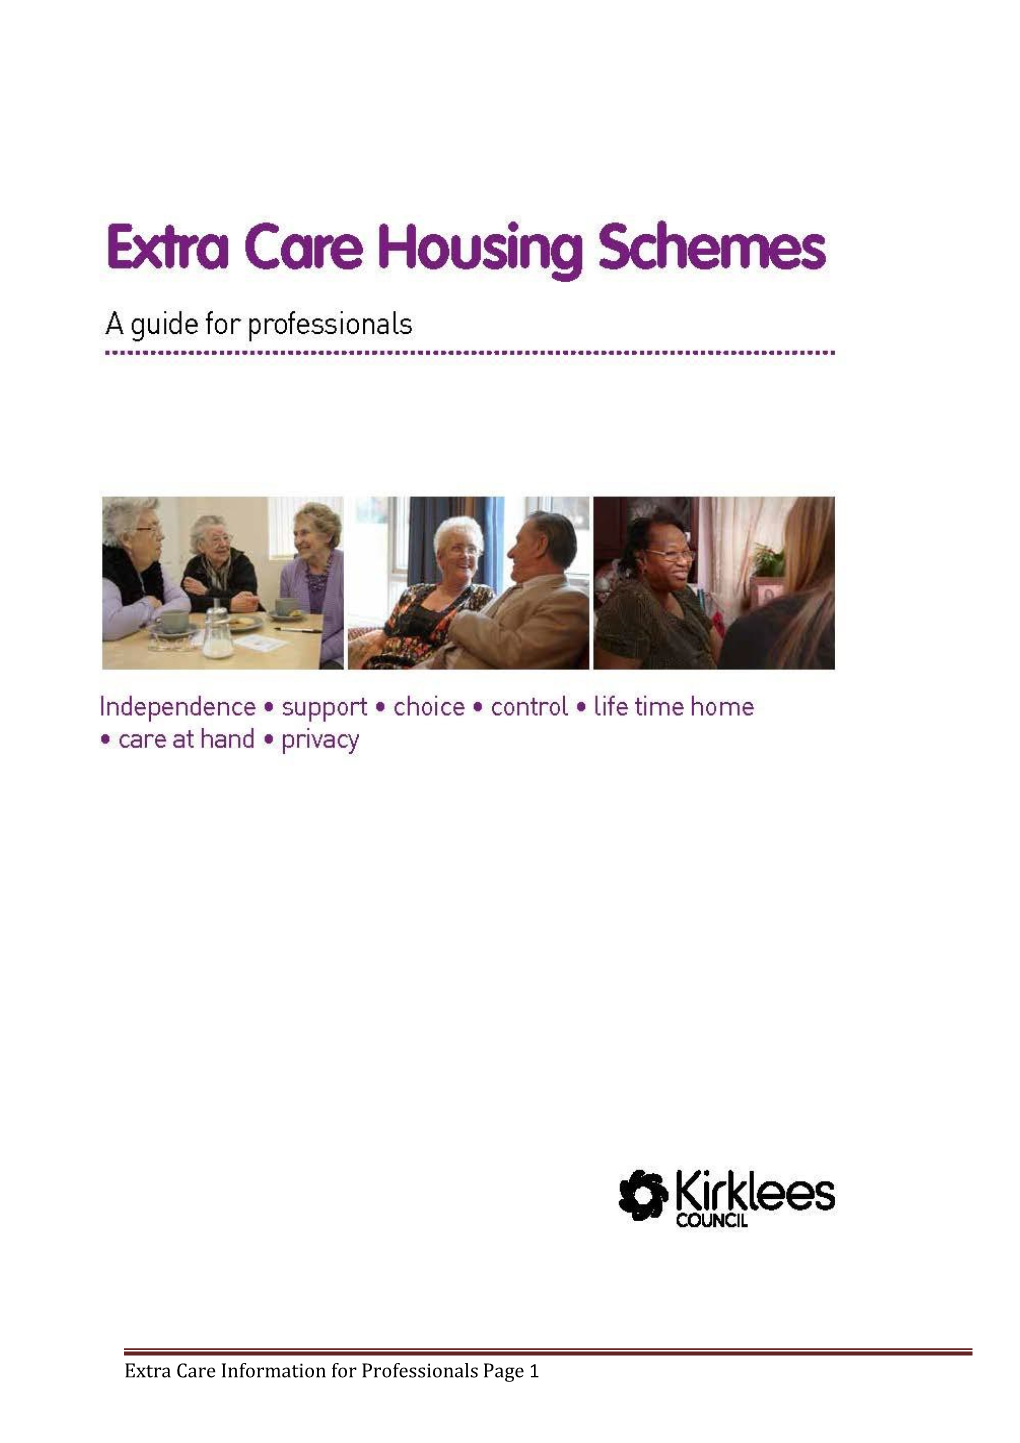 Extra Care Housing Information for Professionals